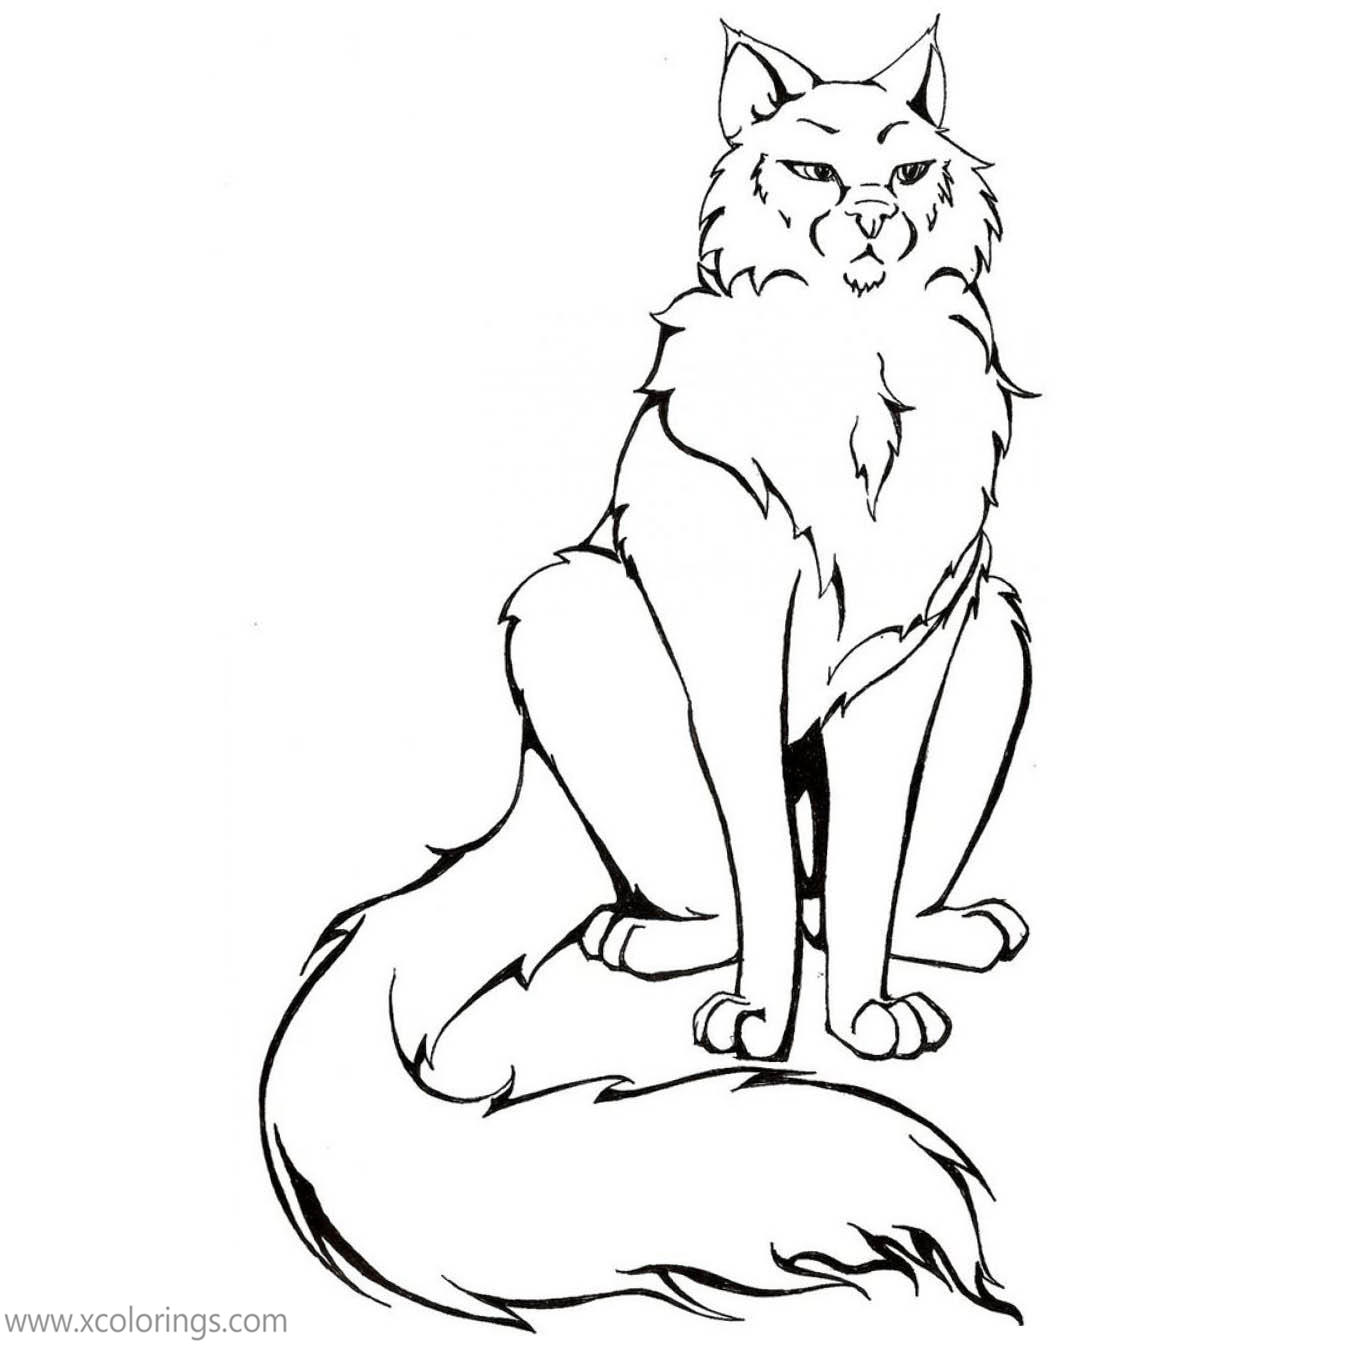 Free Brave Warrior Cat Coloring Pages printable